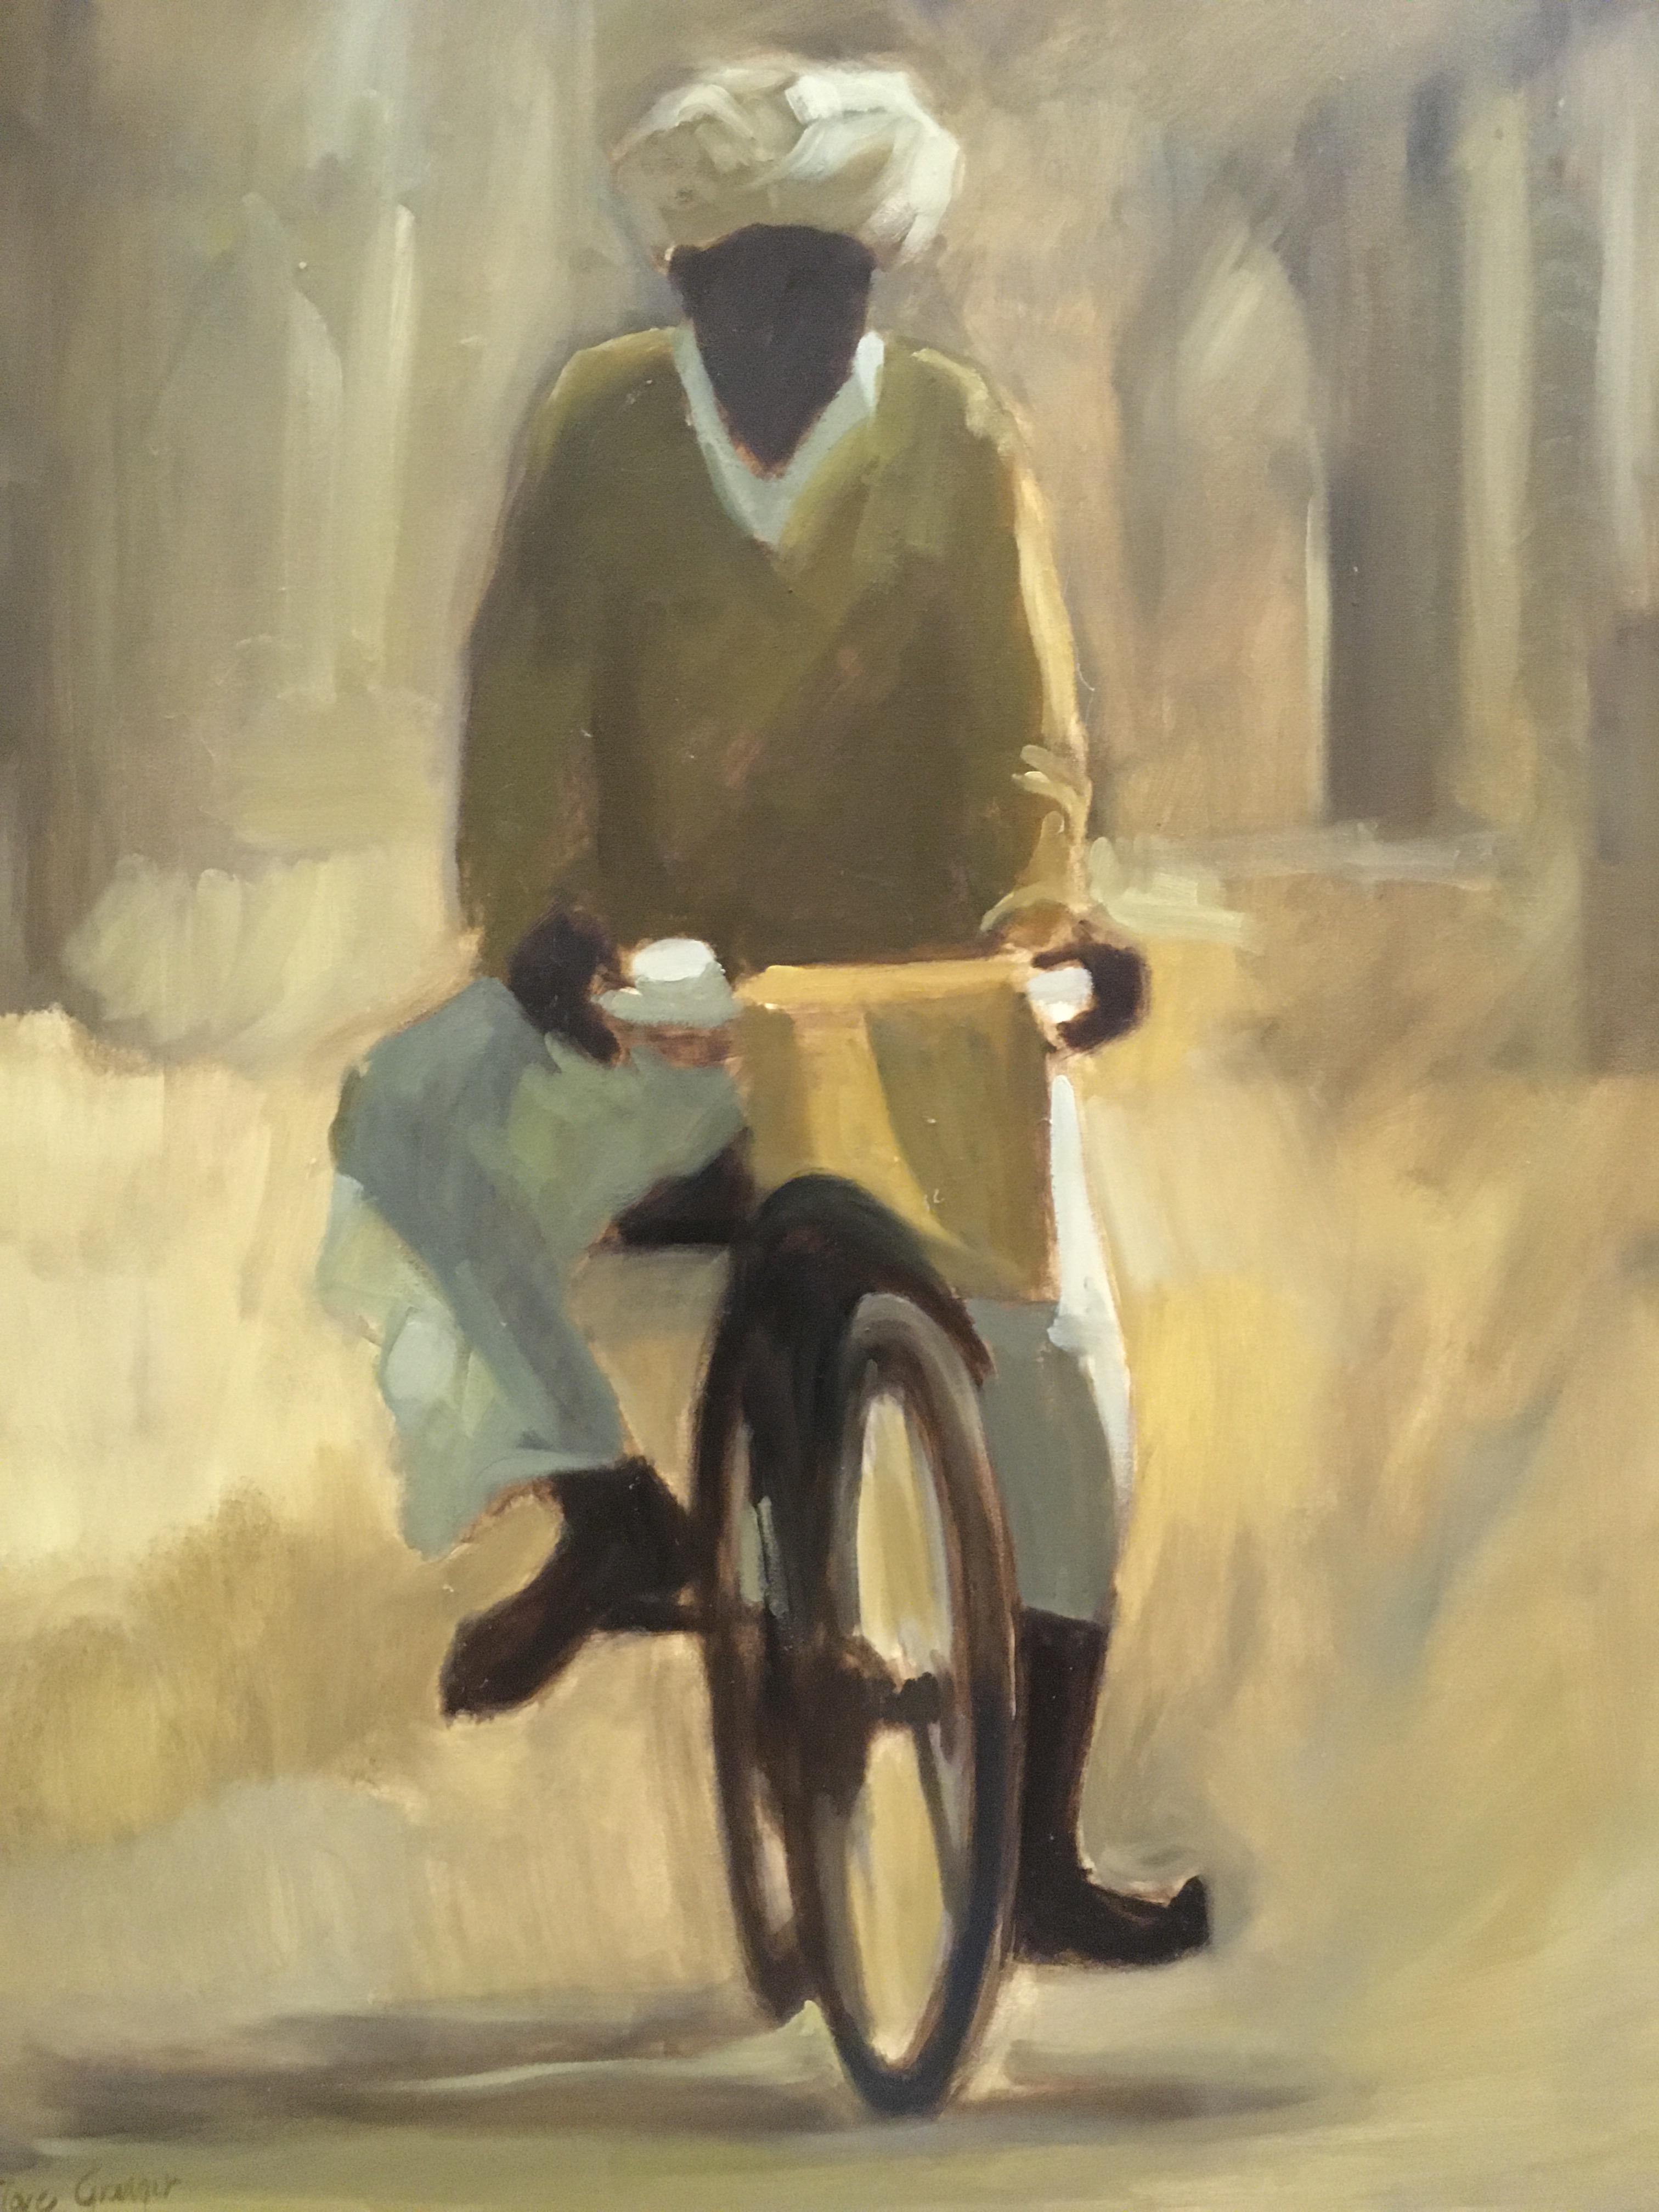 CLARE GRANGER "Man on a bike (India)" oil on canvas 70 cm x 60 cm, signed lower left, - Image 2 of 2